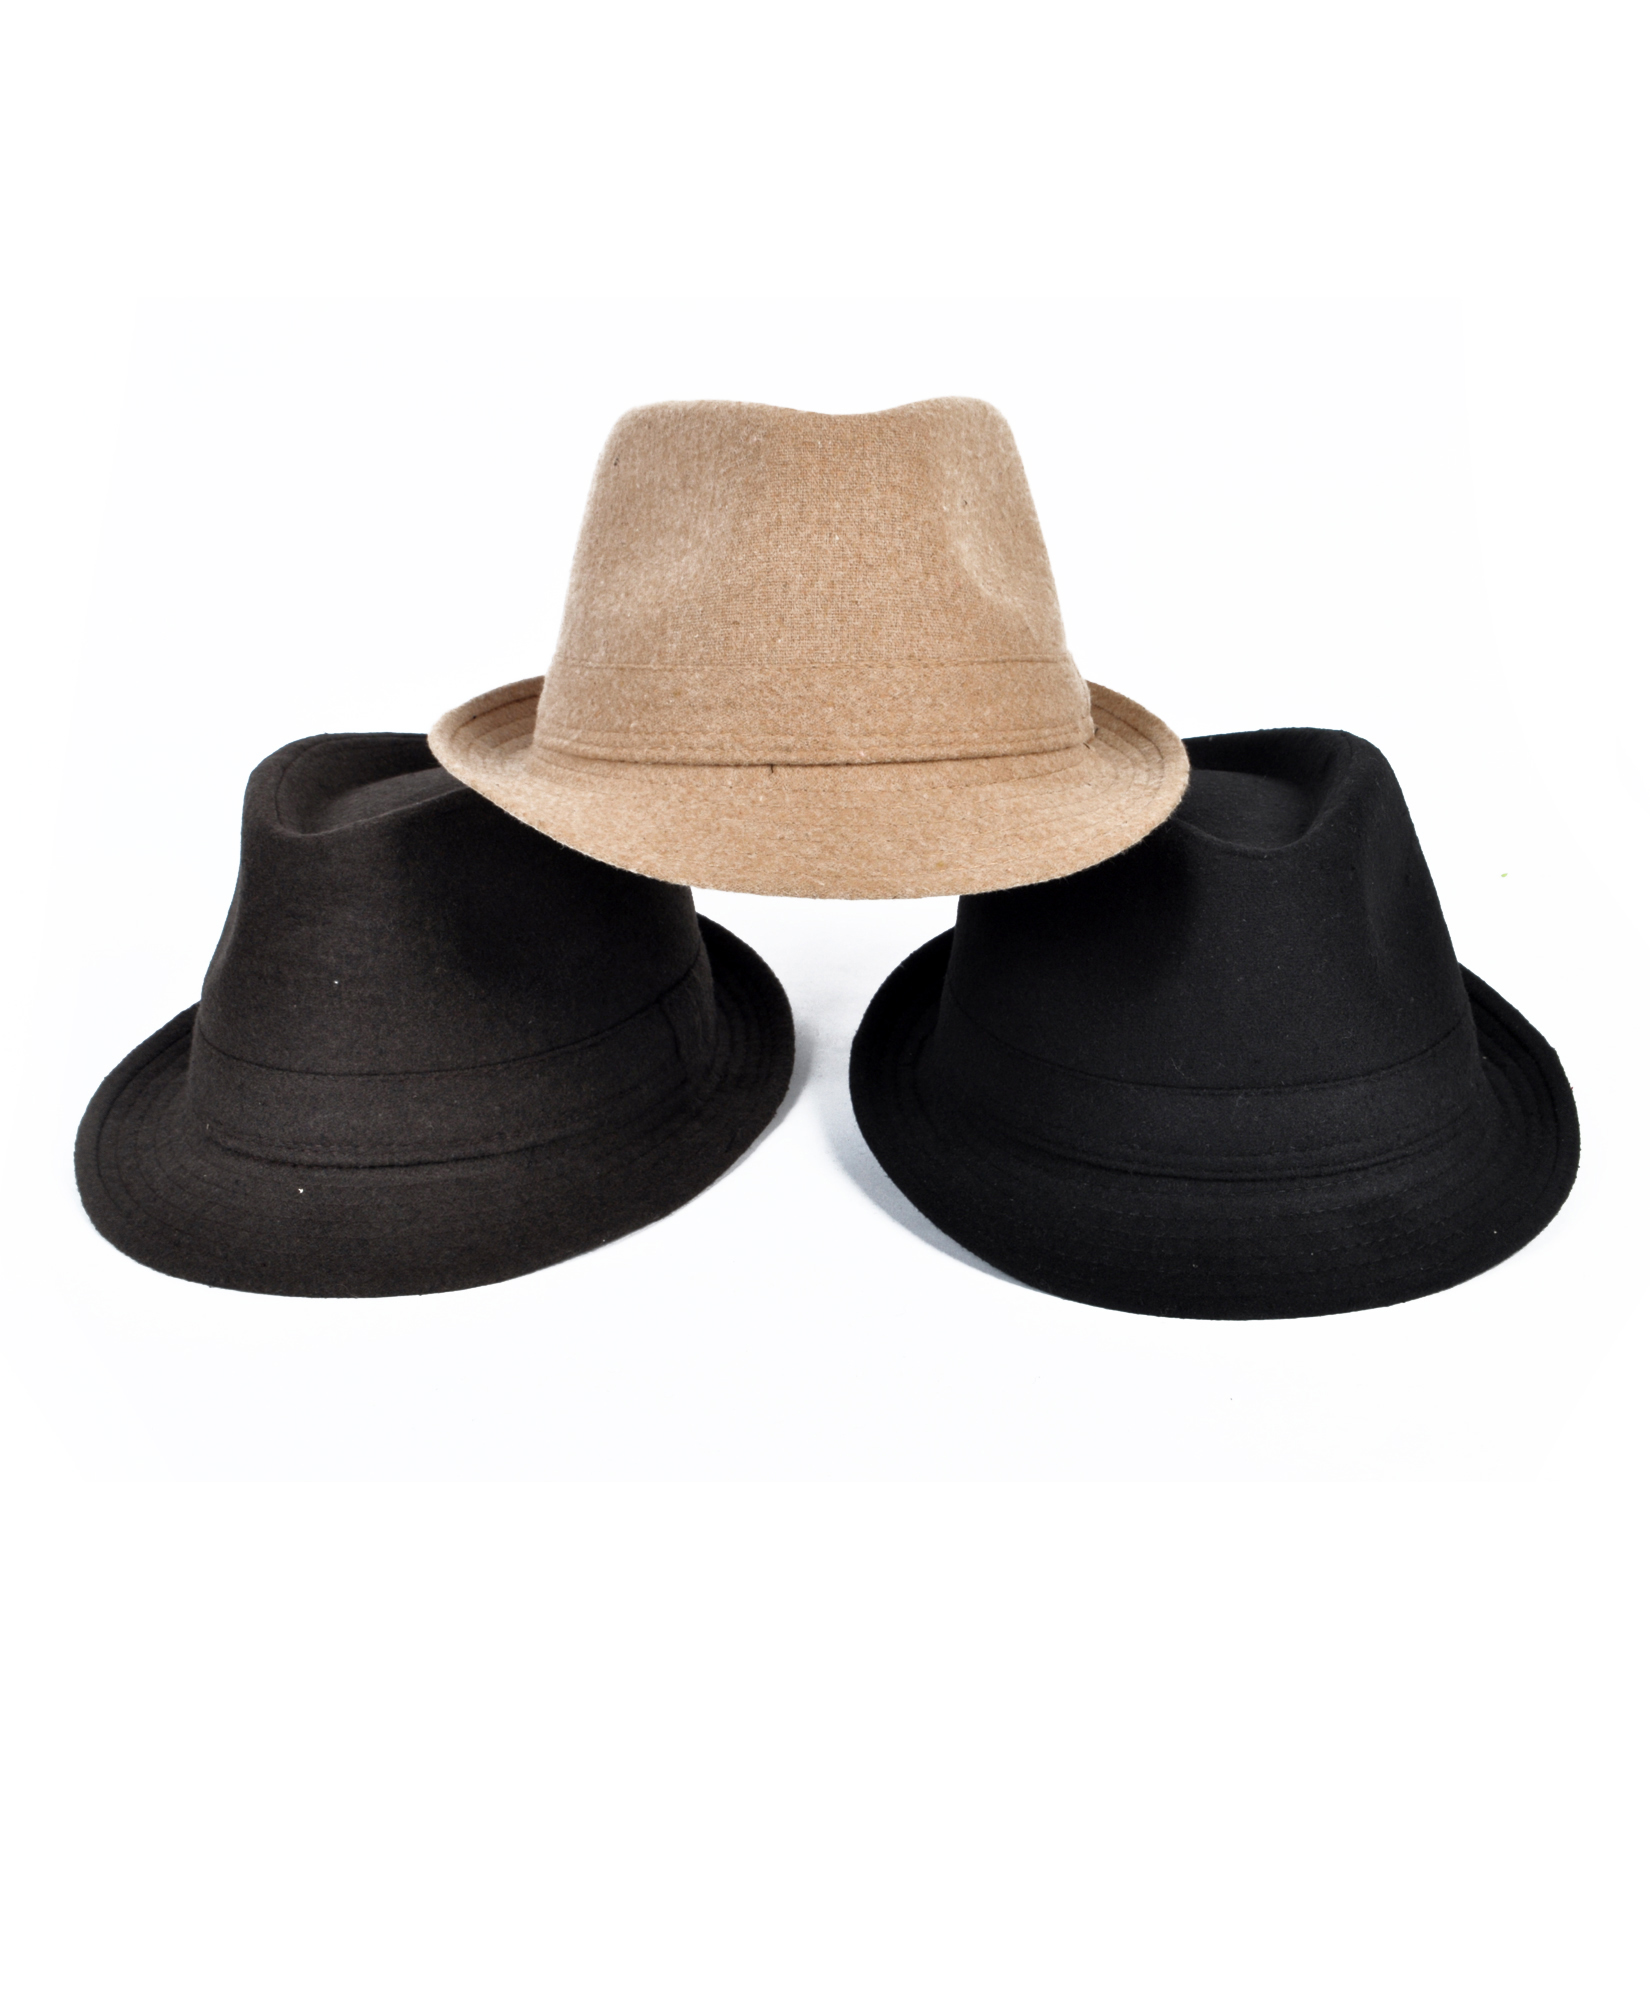 West End Back to Solids Fedora Hats